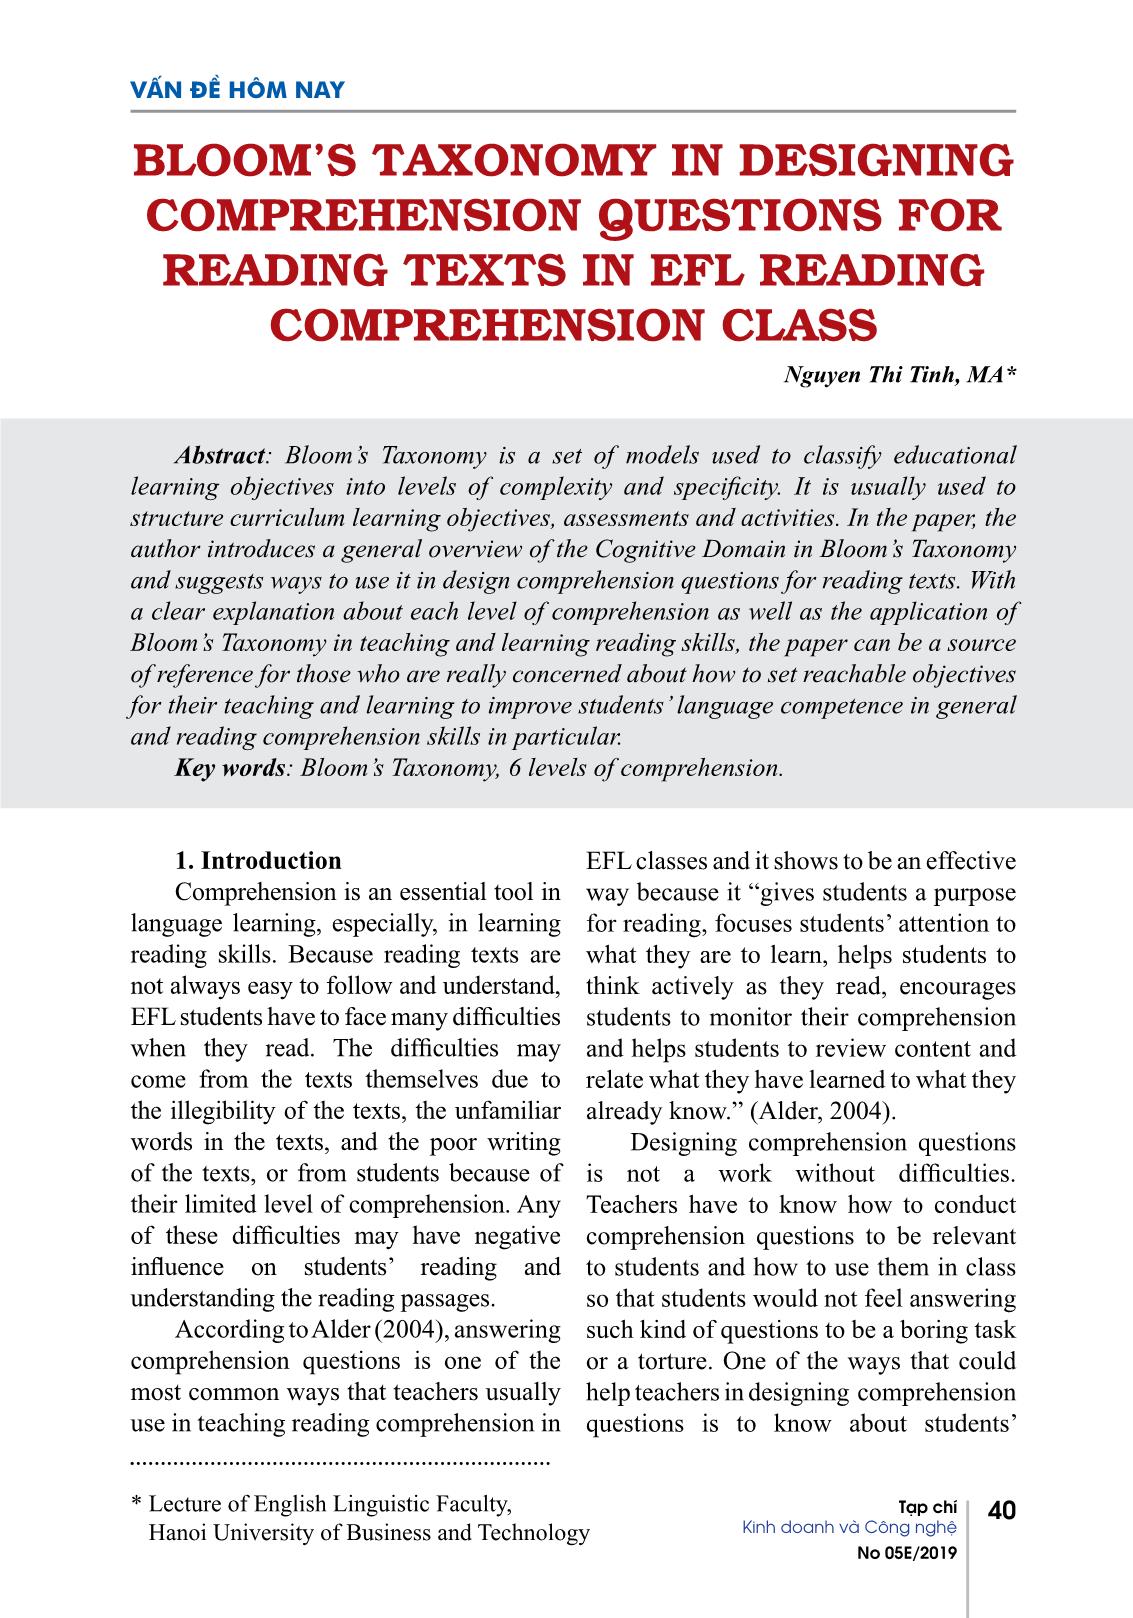 Bloom’s taxonomy in designing comprehension questions for reading texts in EFL reading comprehension class trang 1